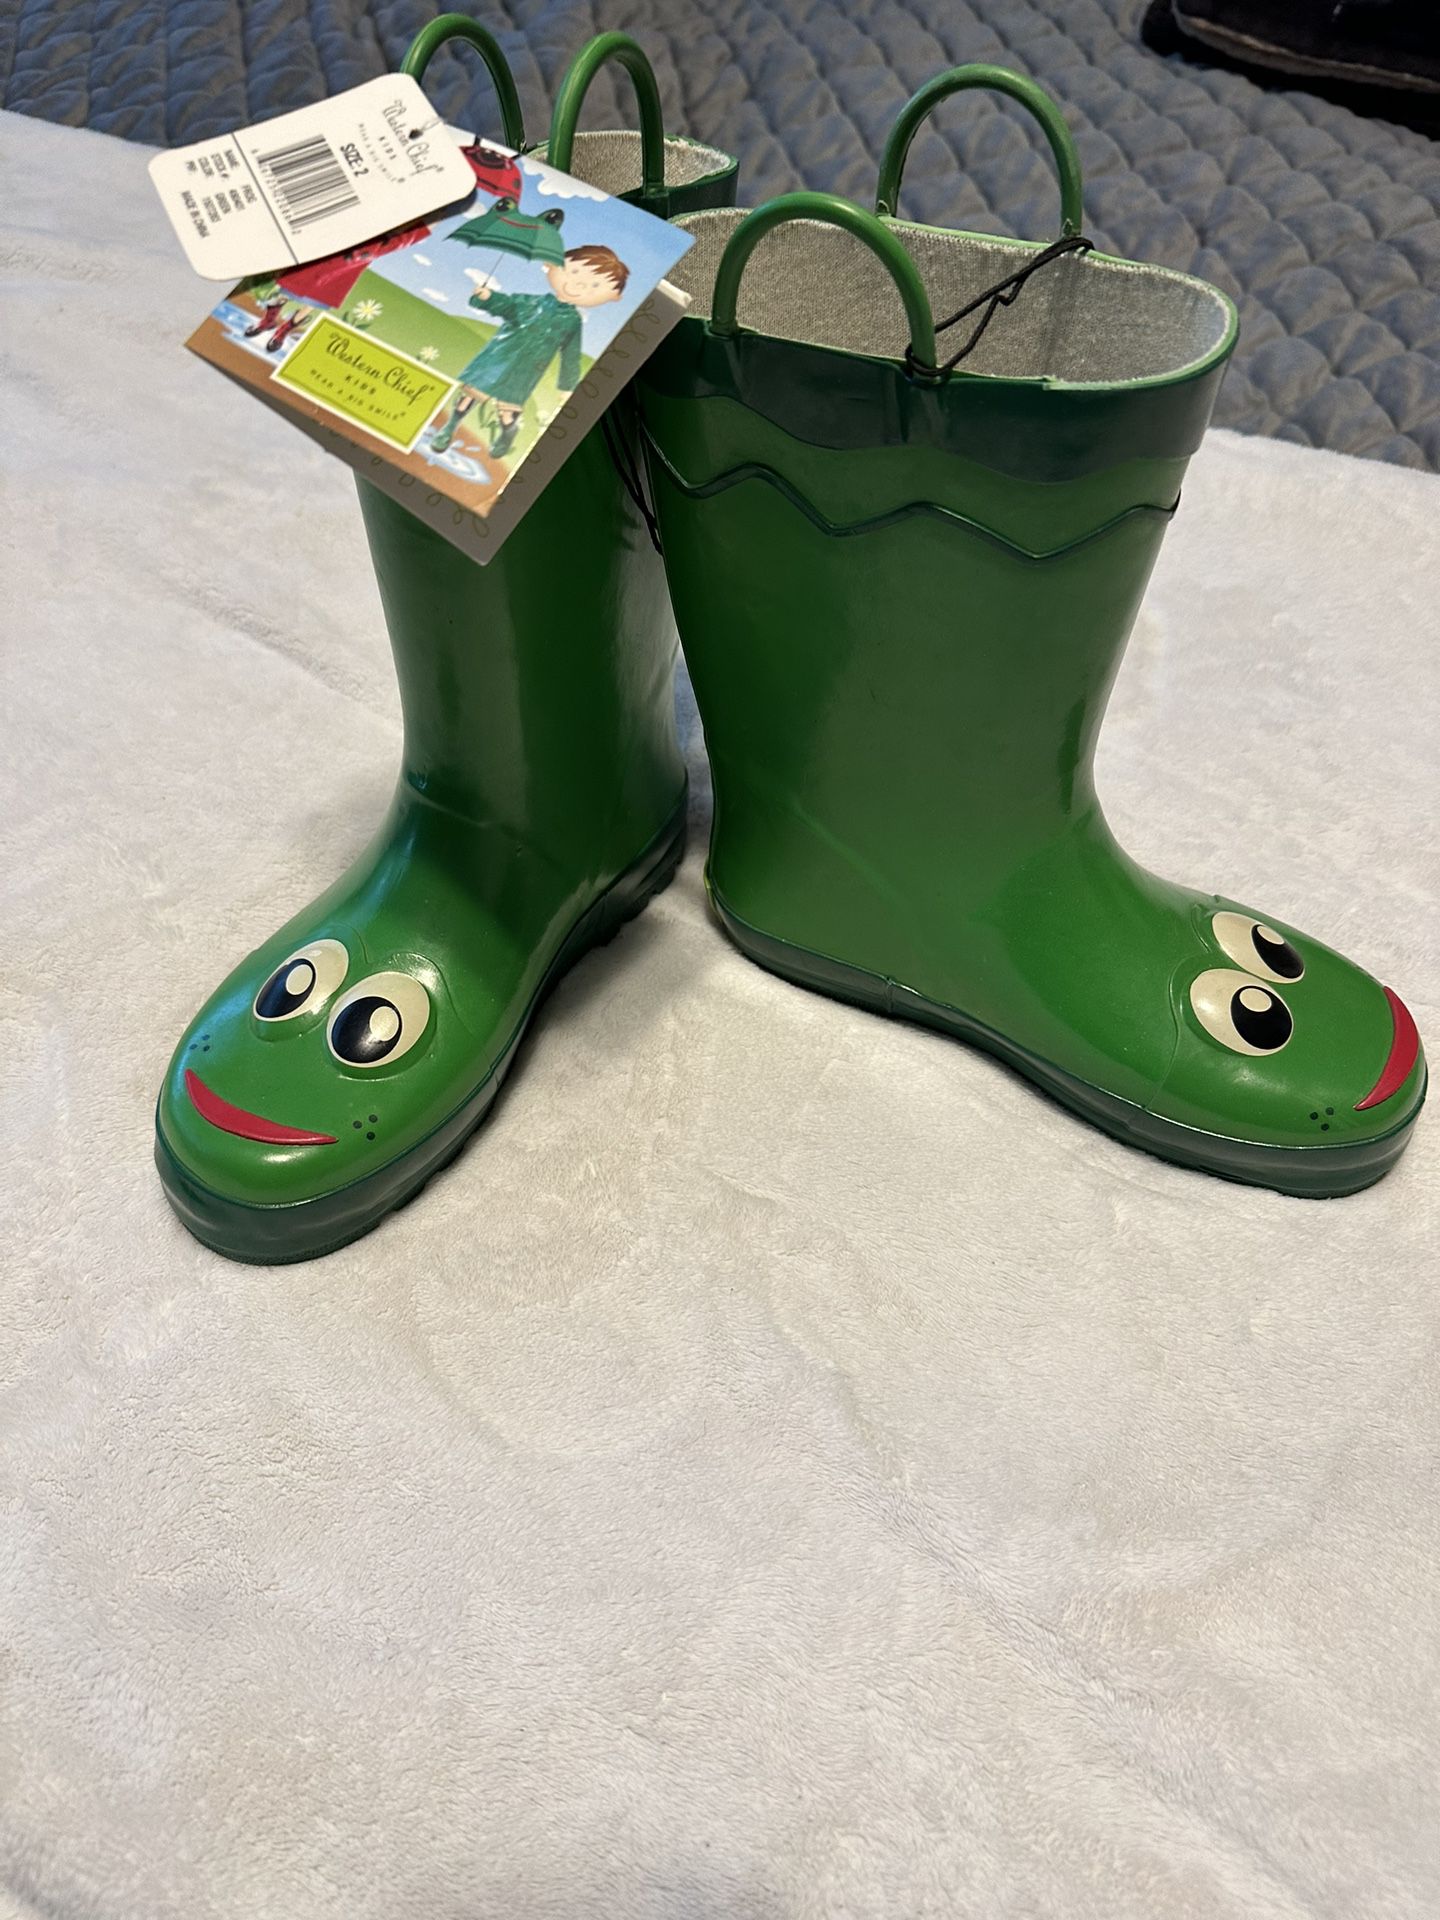 size 2 children’s kids Rubber Rain Boots western chief green frog boots New 